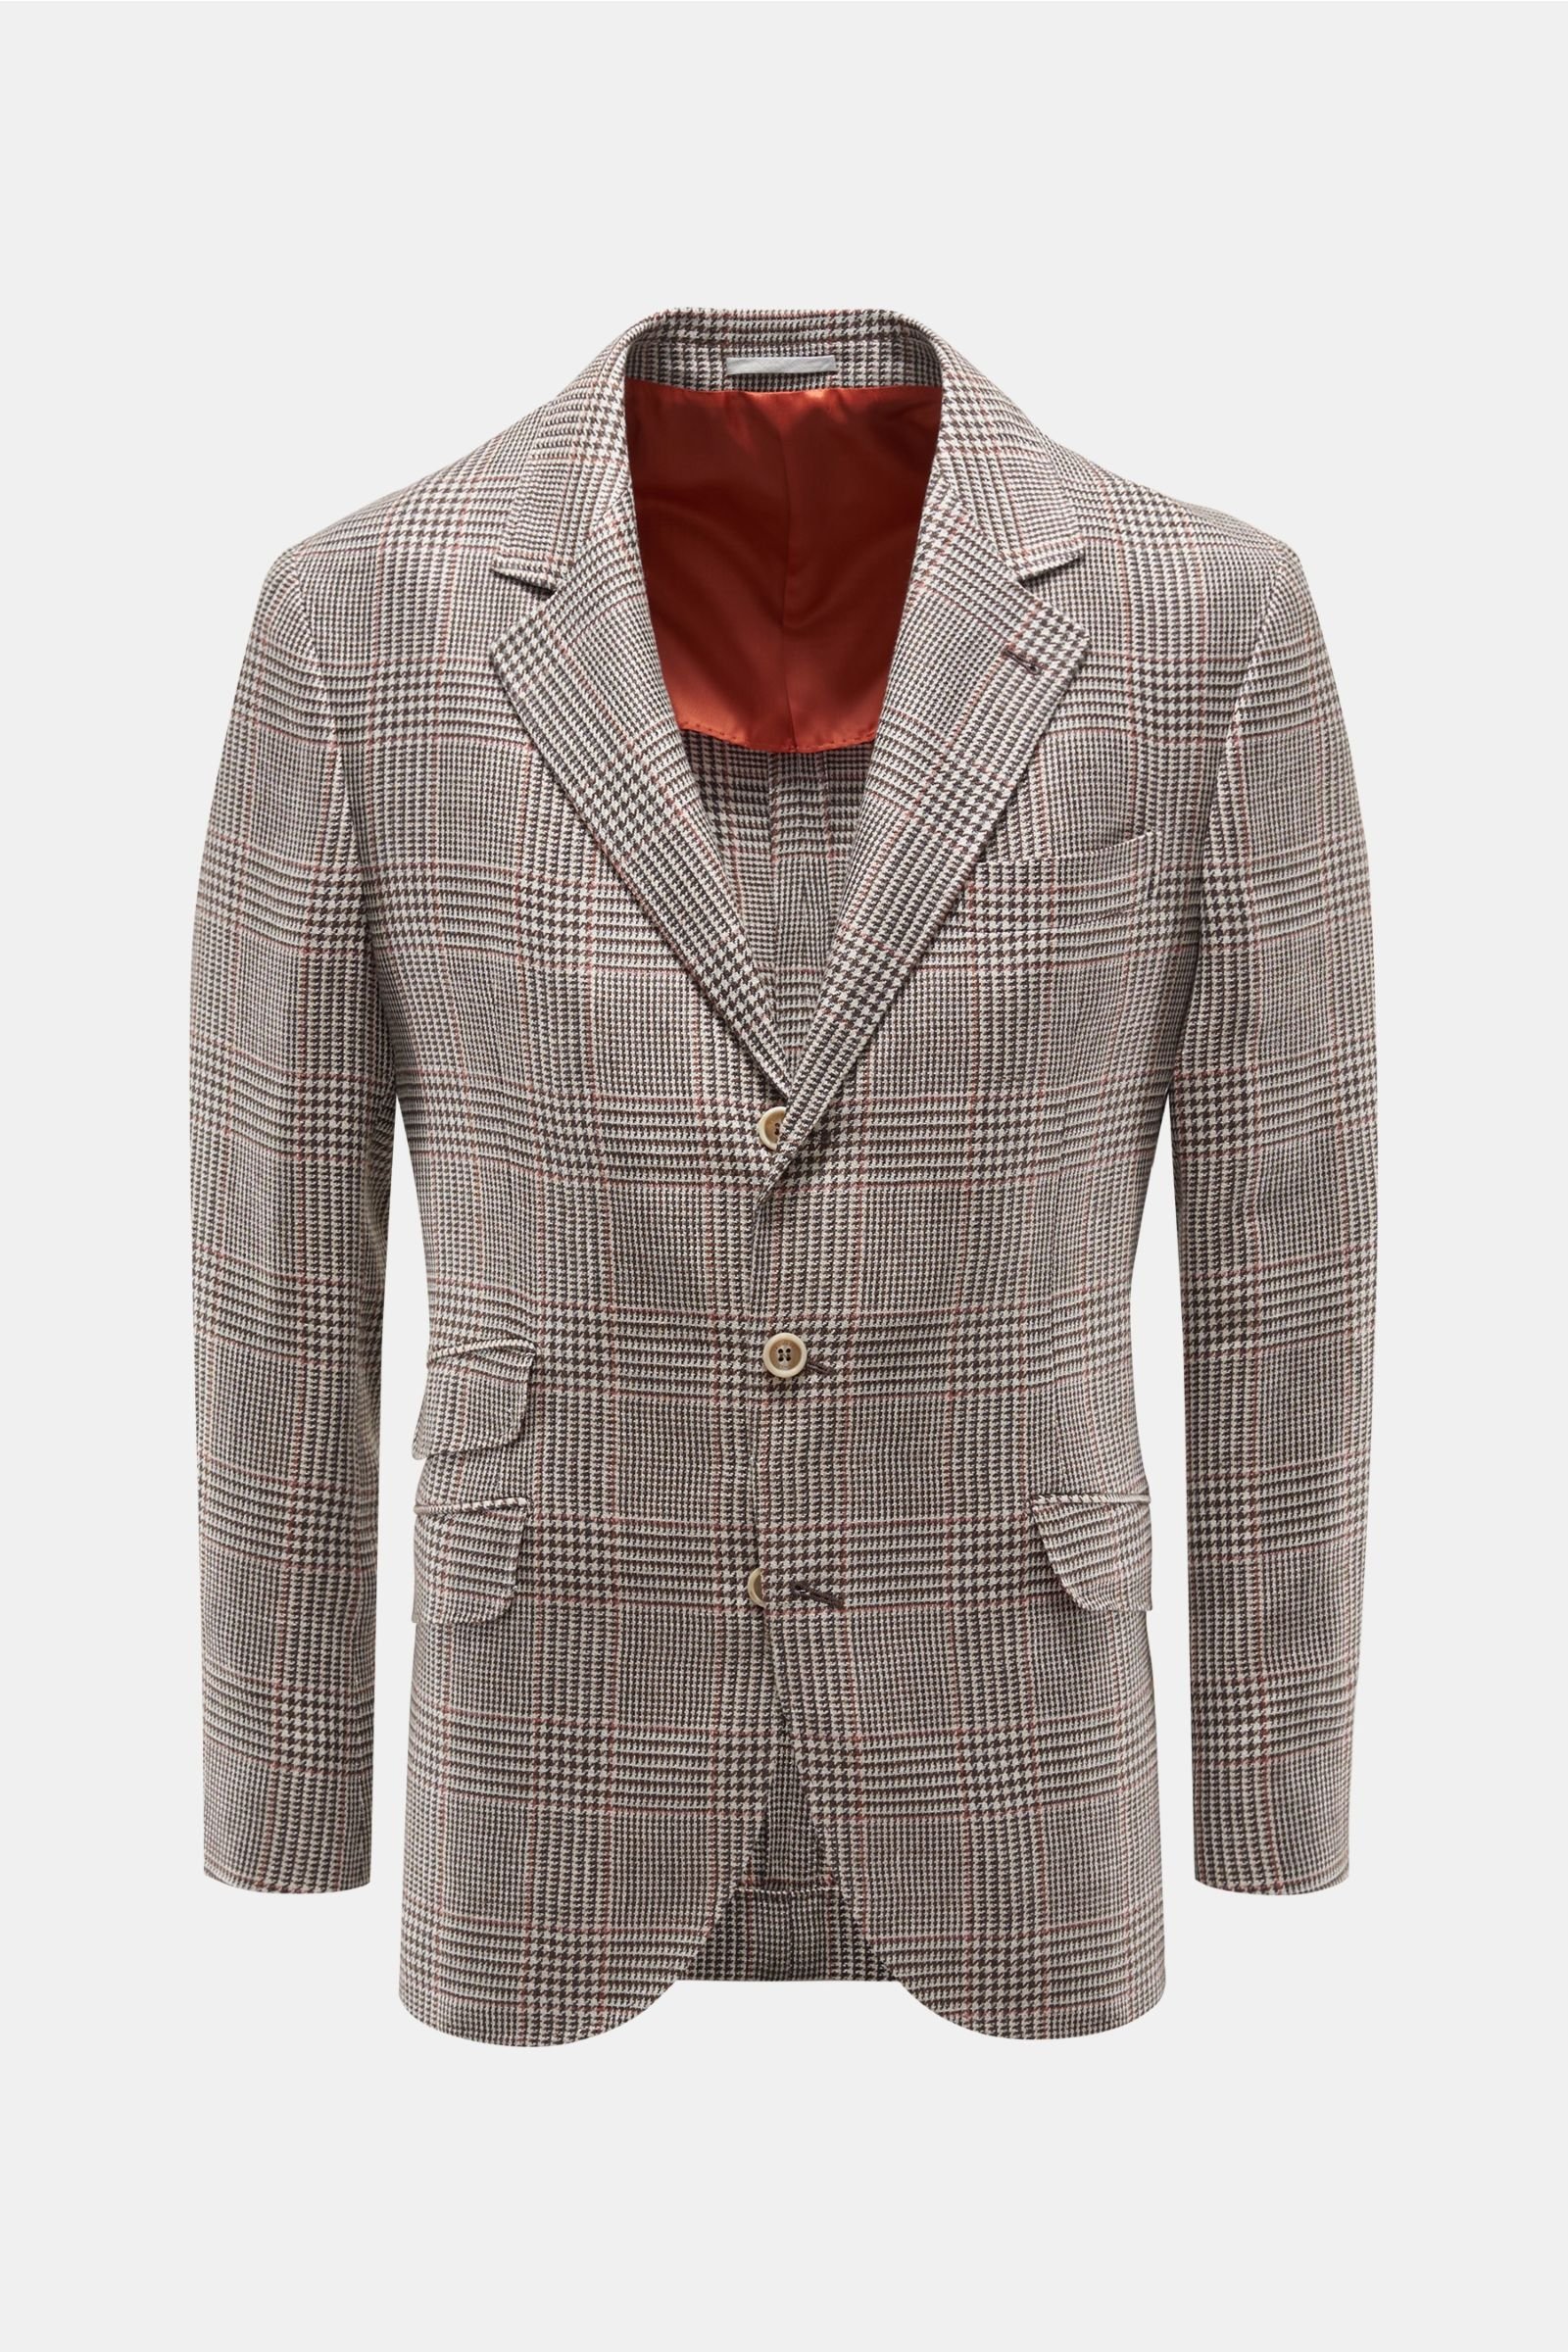 Smart-casual jacket off-white/dark brown checked